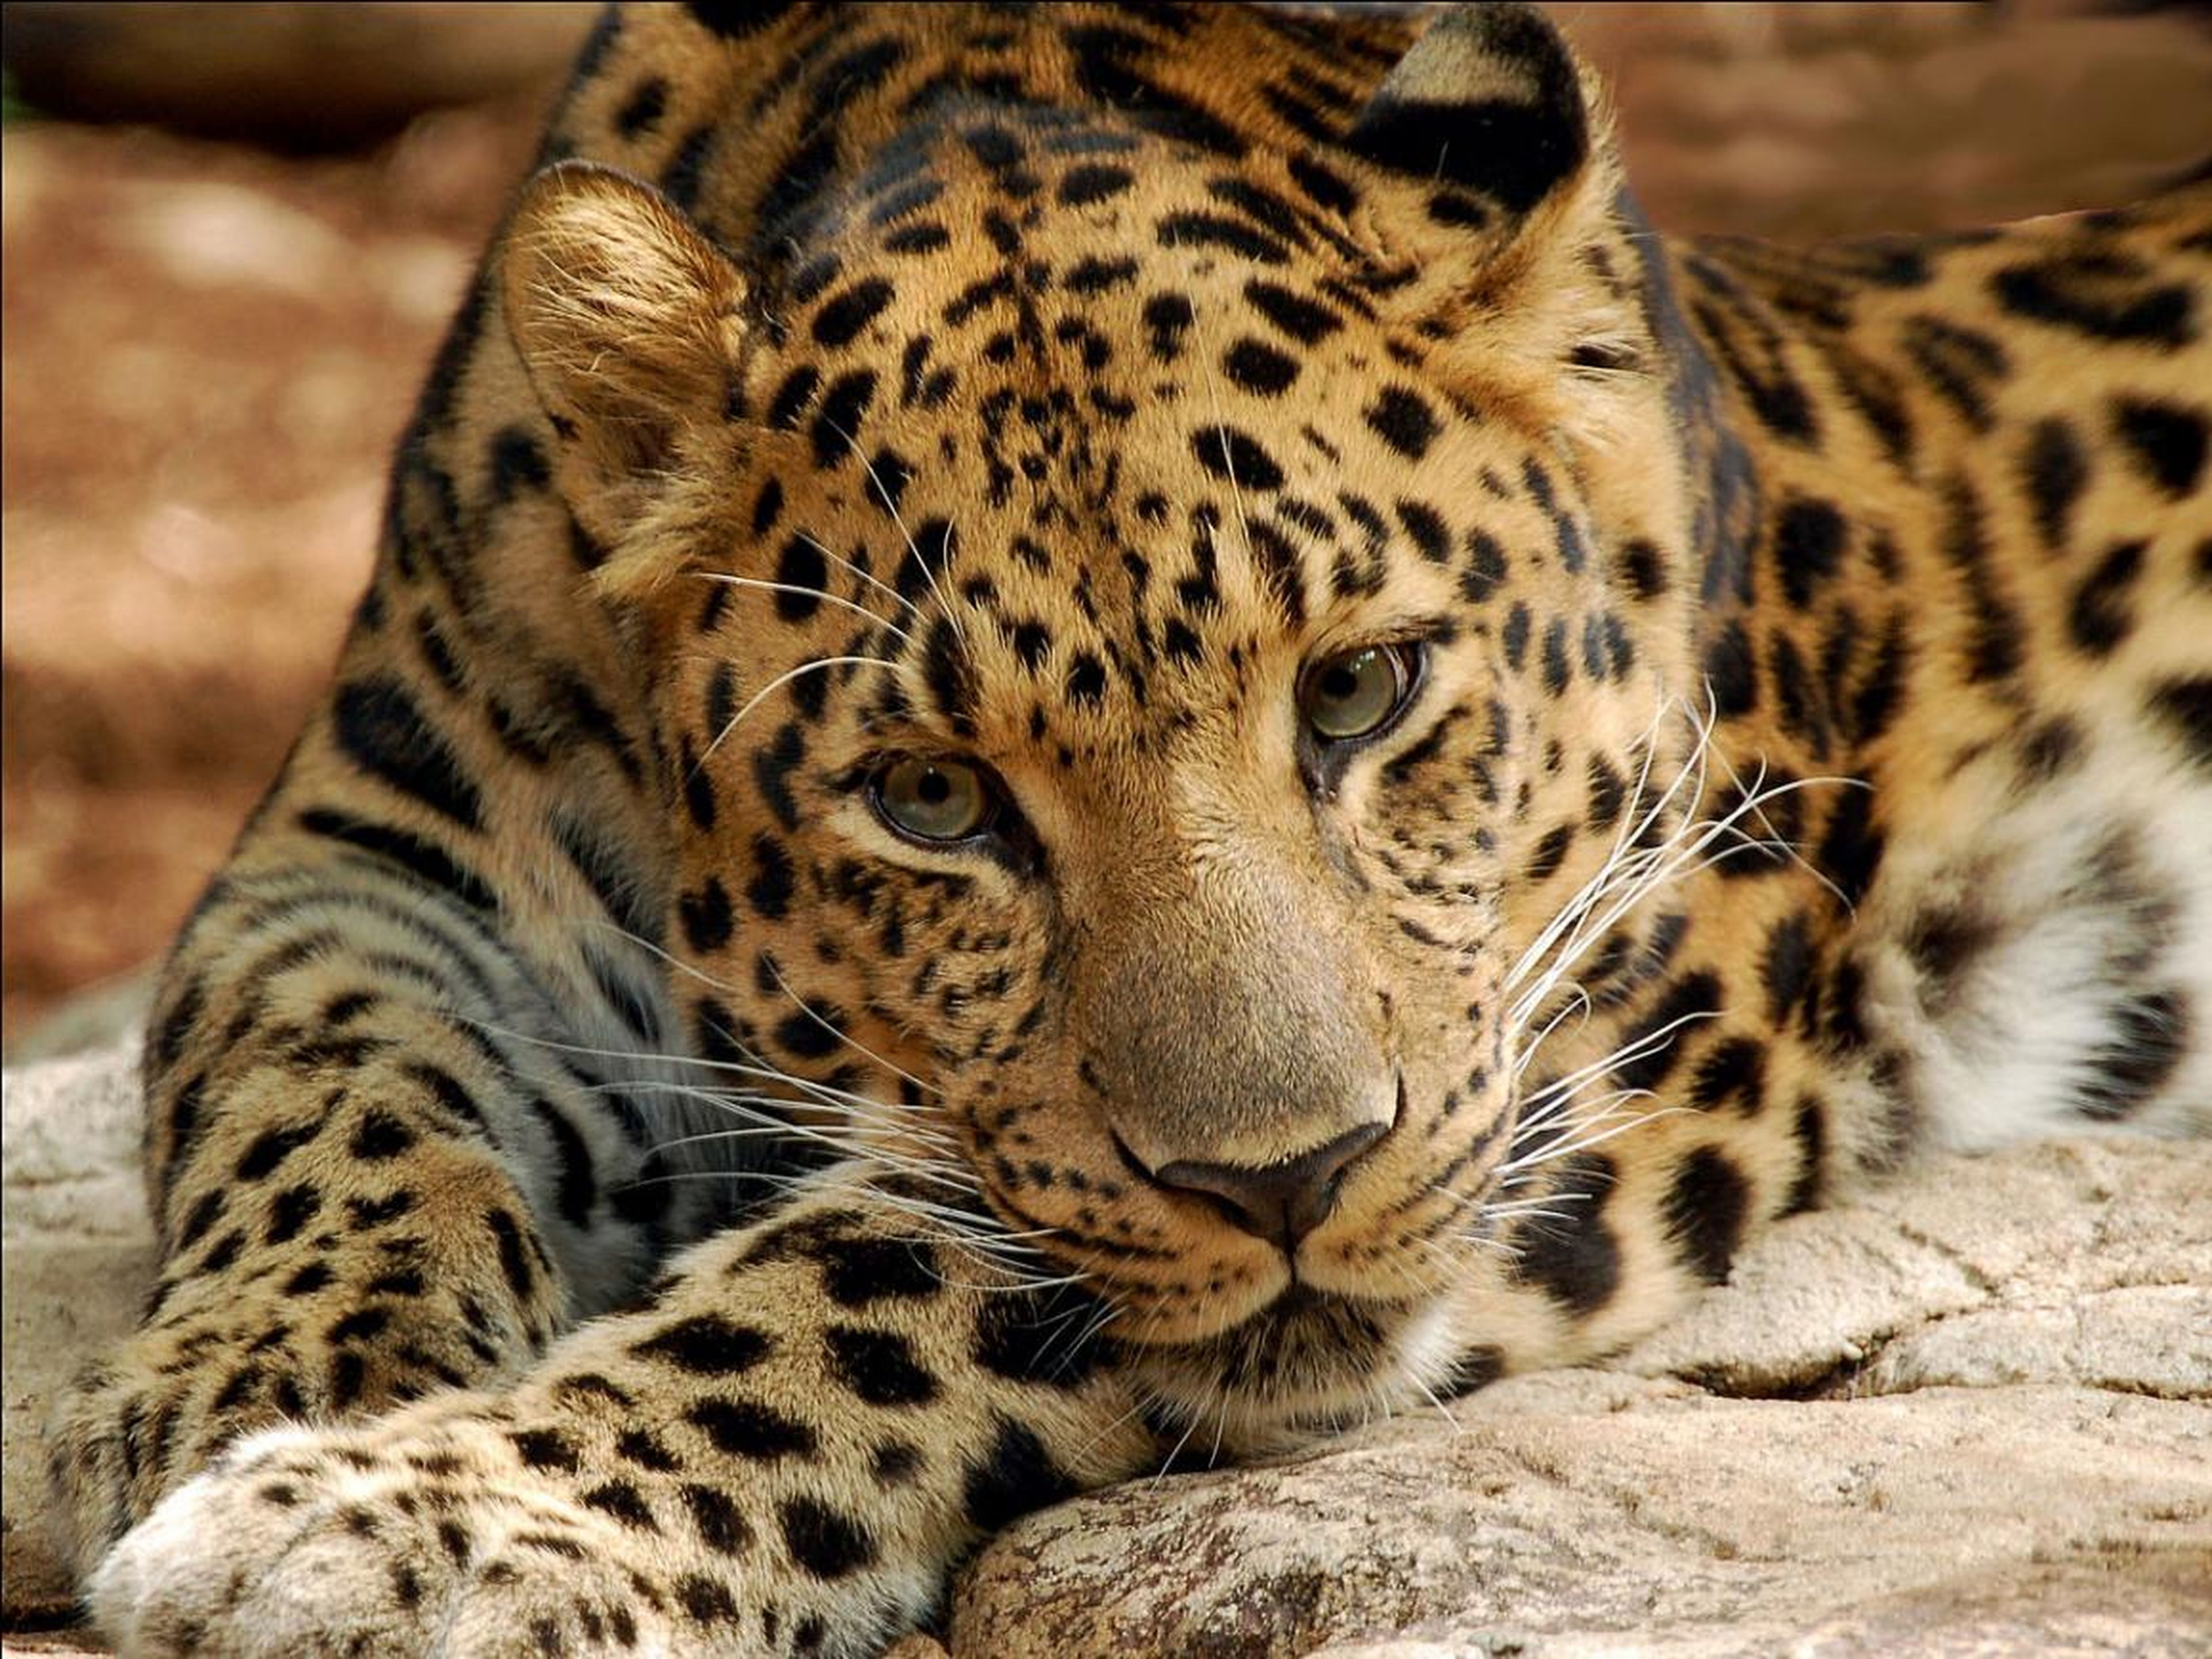 The Amur leopard is critically endangered.